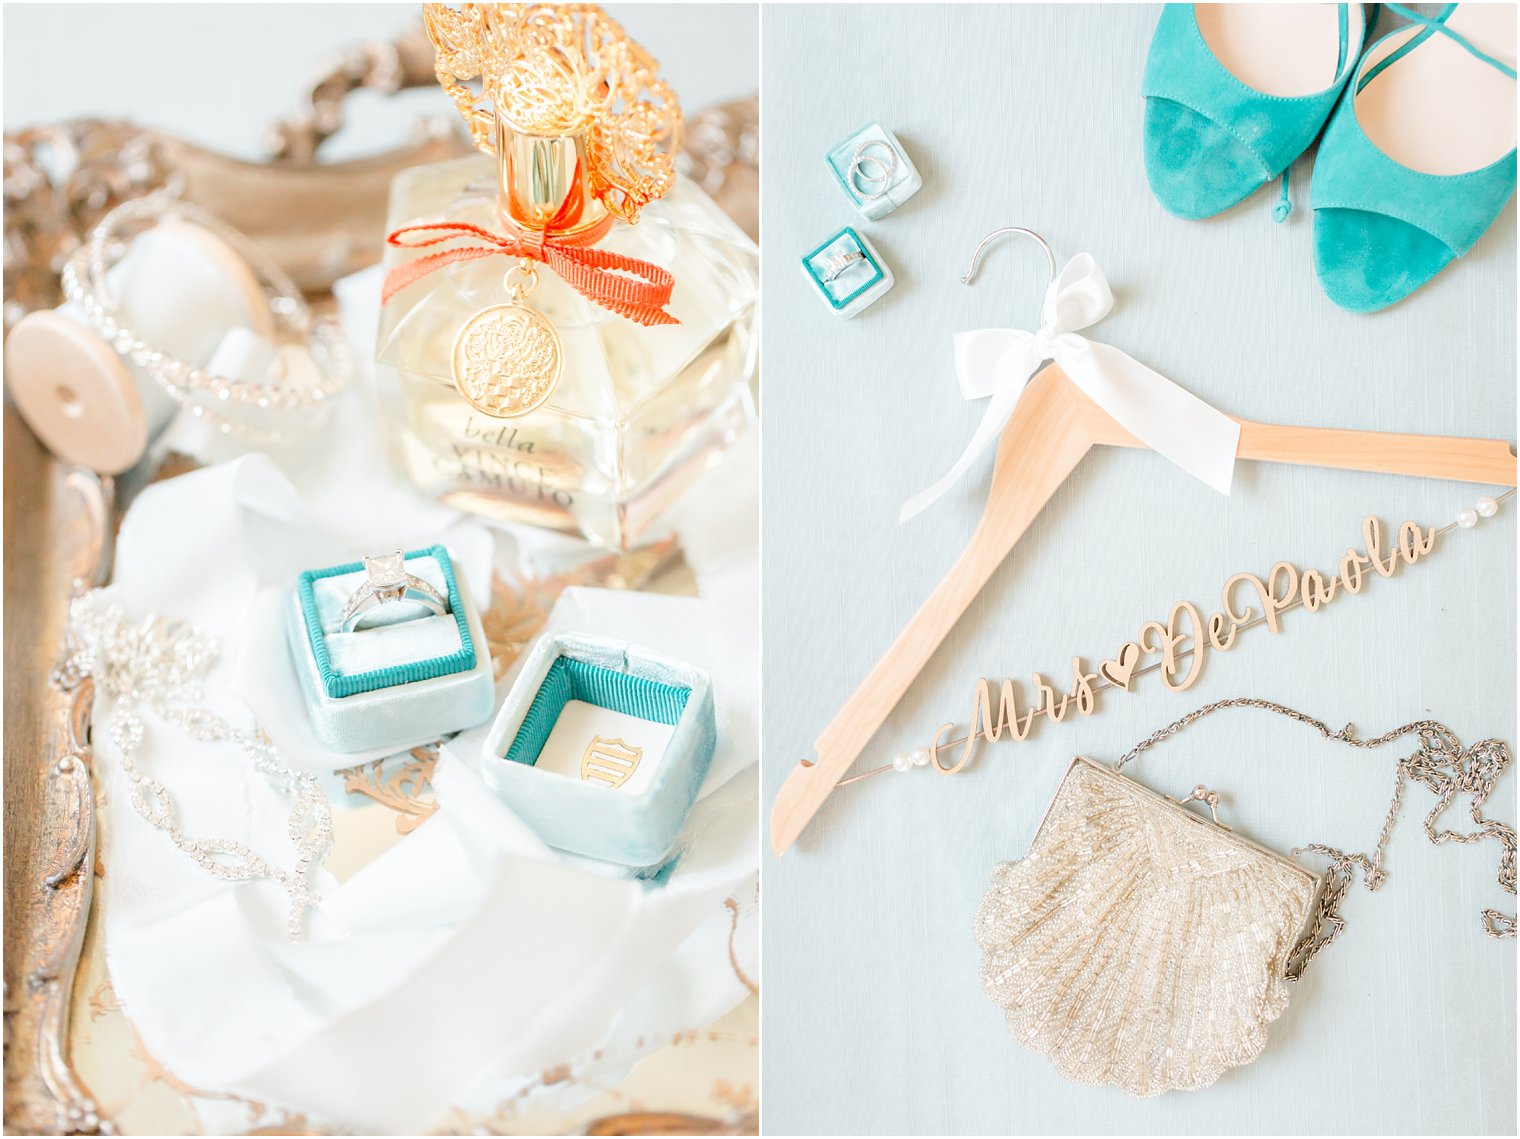 Wedding details with turquoise accents